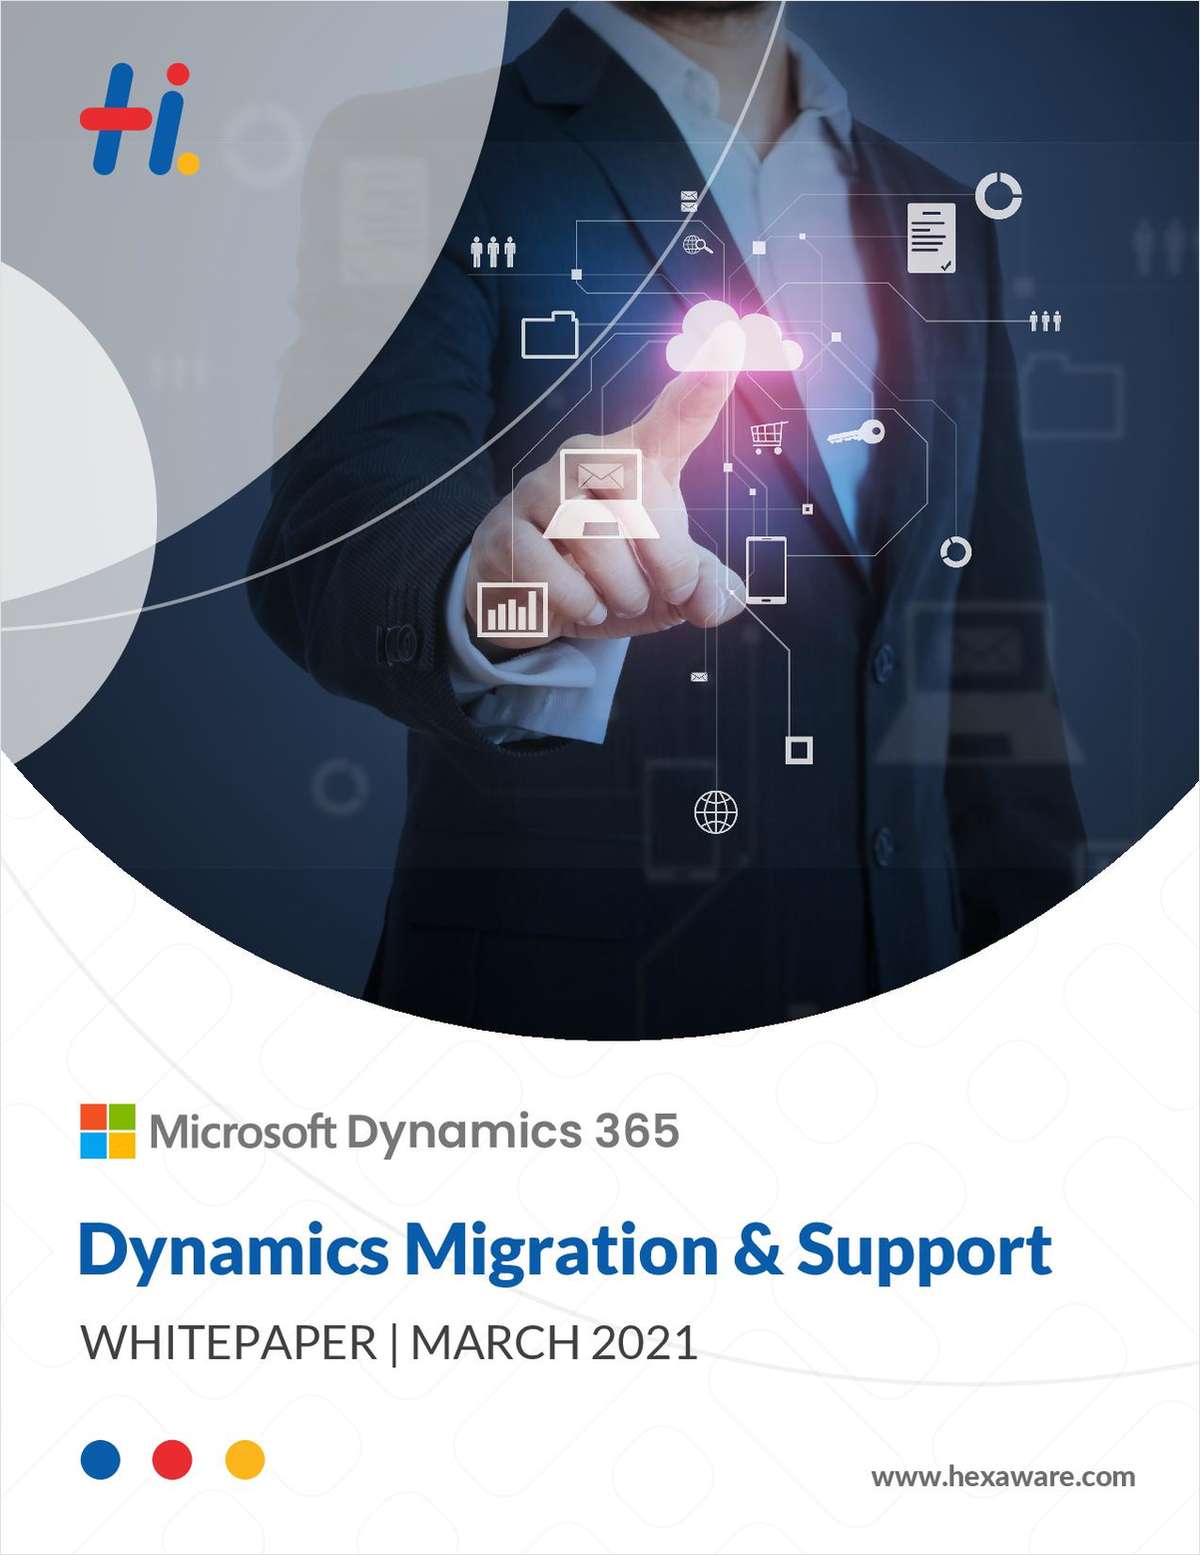 Microsoft Dynamics 365 Support and Migration: The Need to Migrate to Dynamics 365